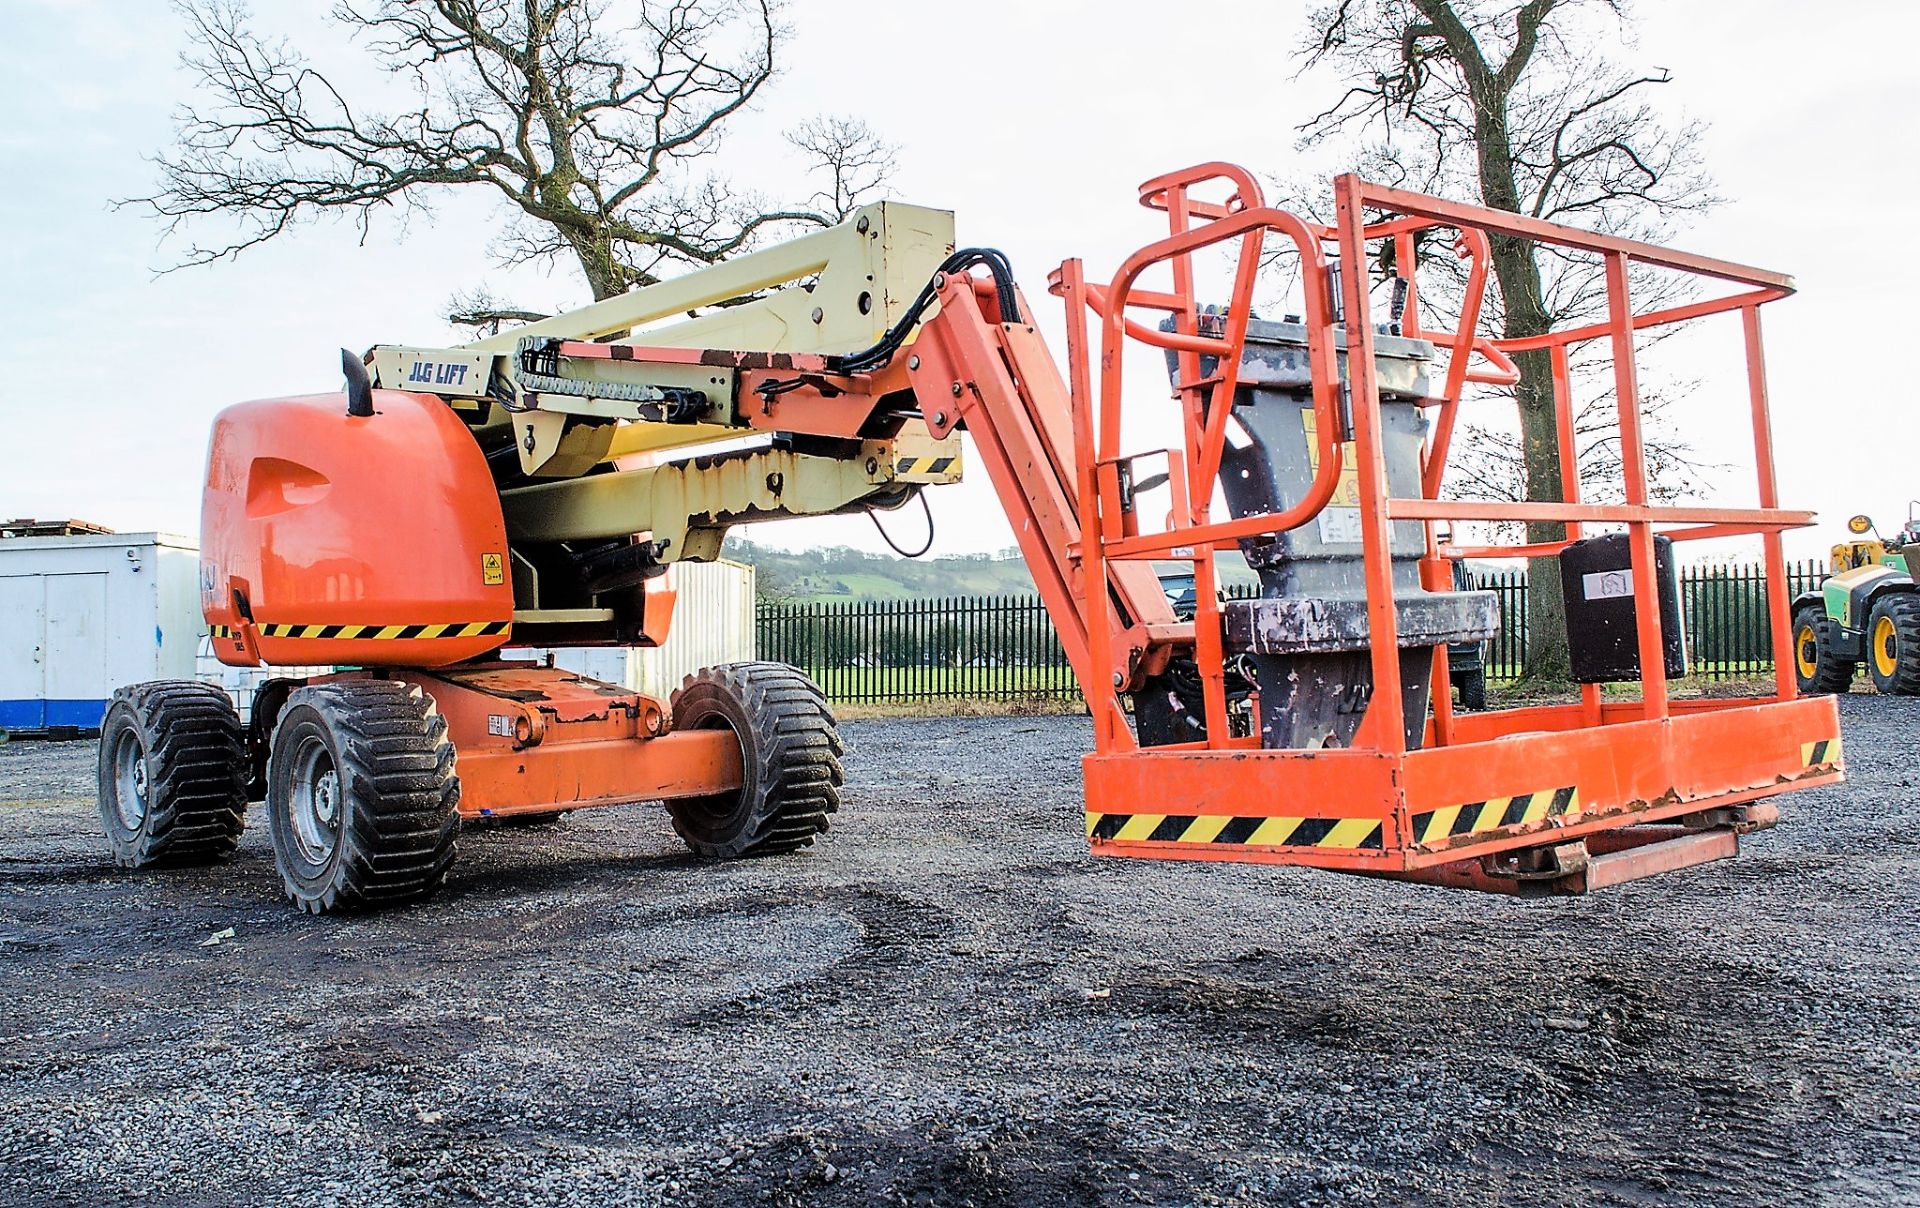 JLG 450AJ diesel driven rough terrain articulated boom access platform Year: 2007 S/N: 5190 Recorded - Image 2 of 17